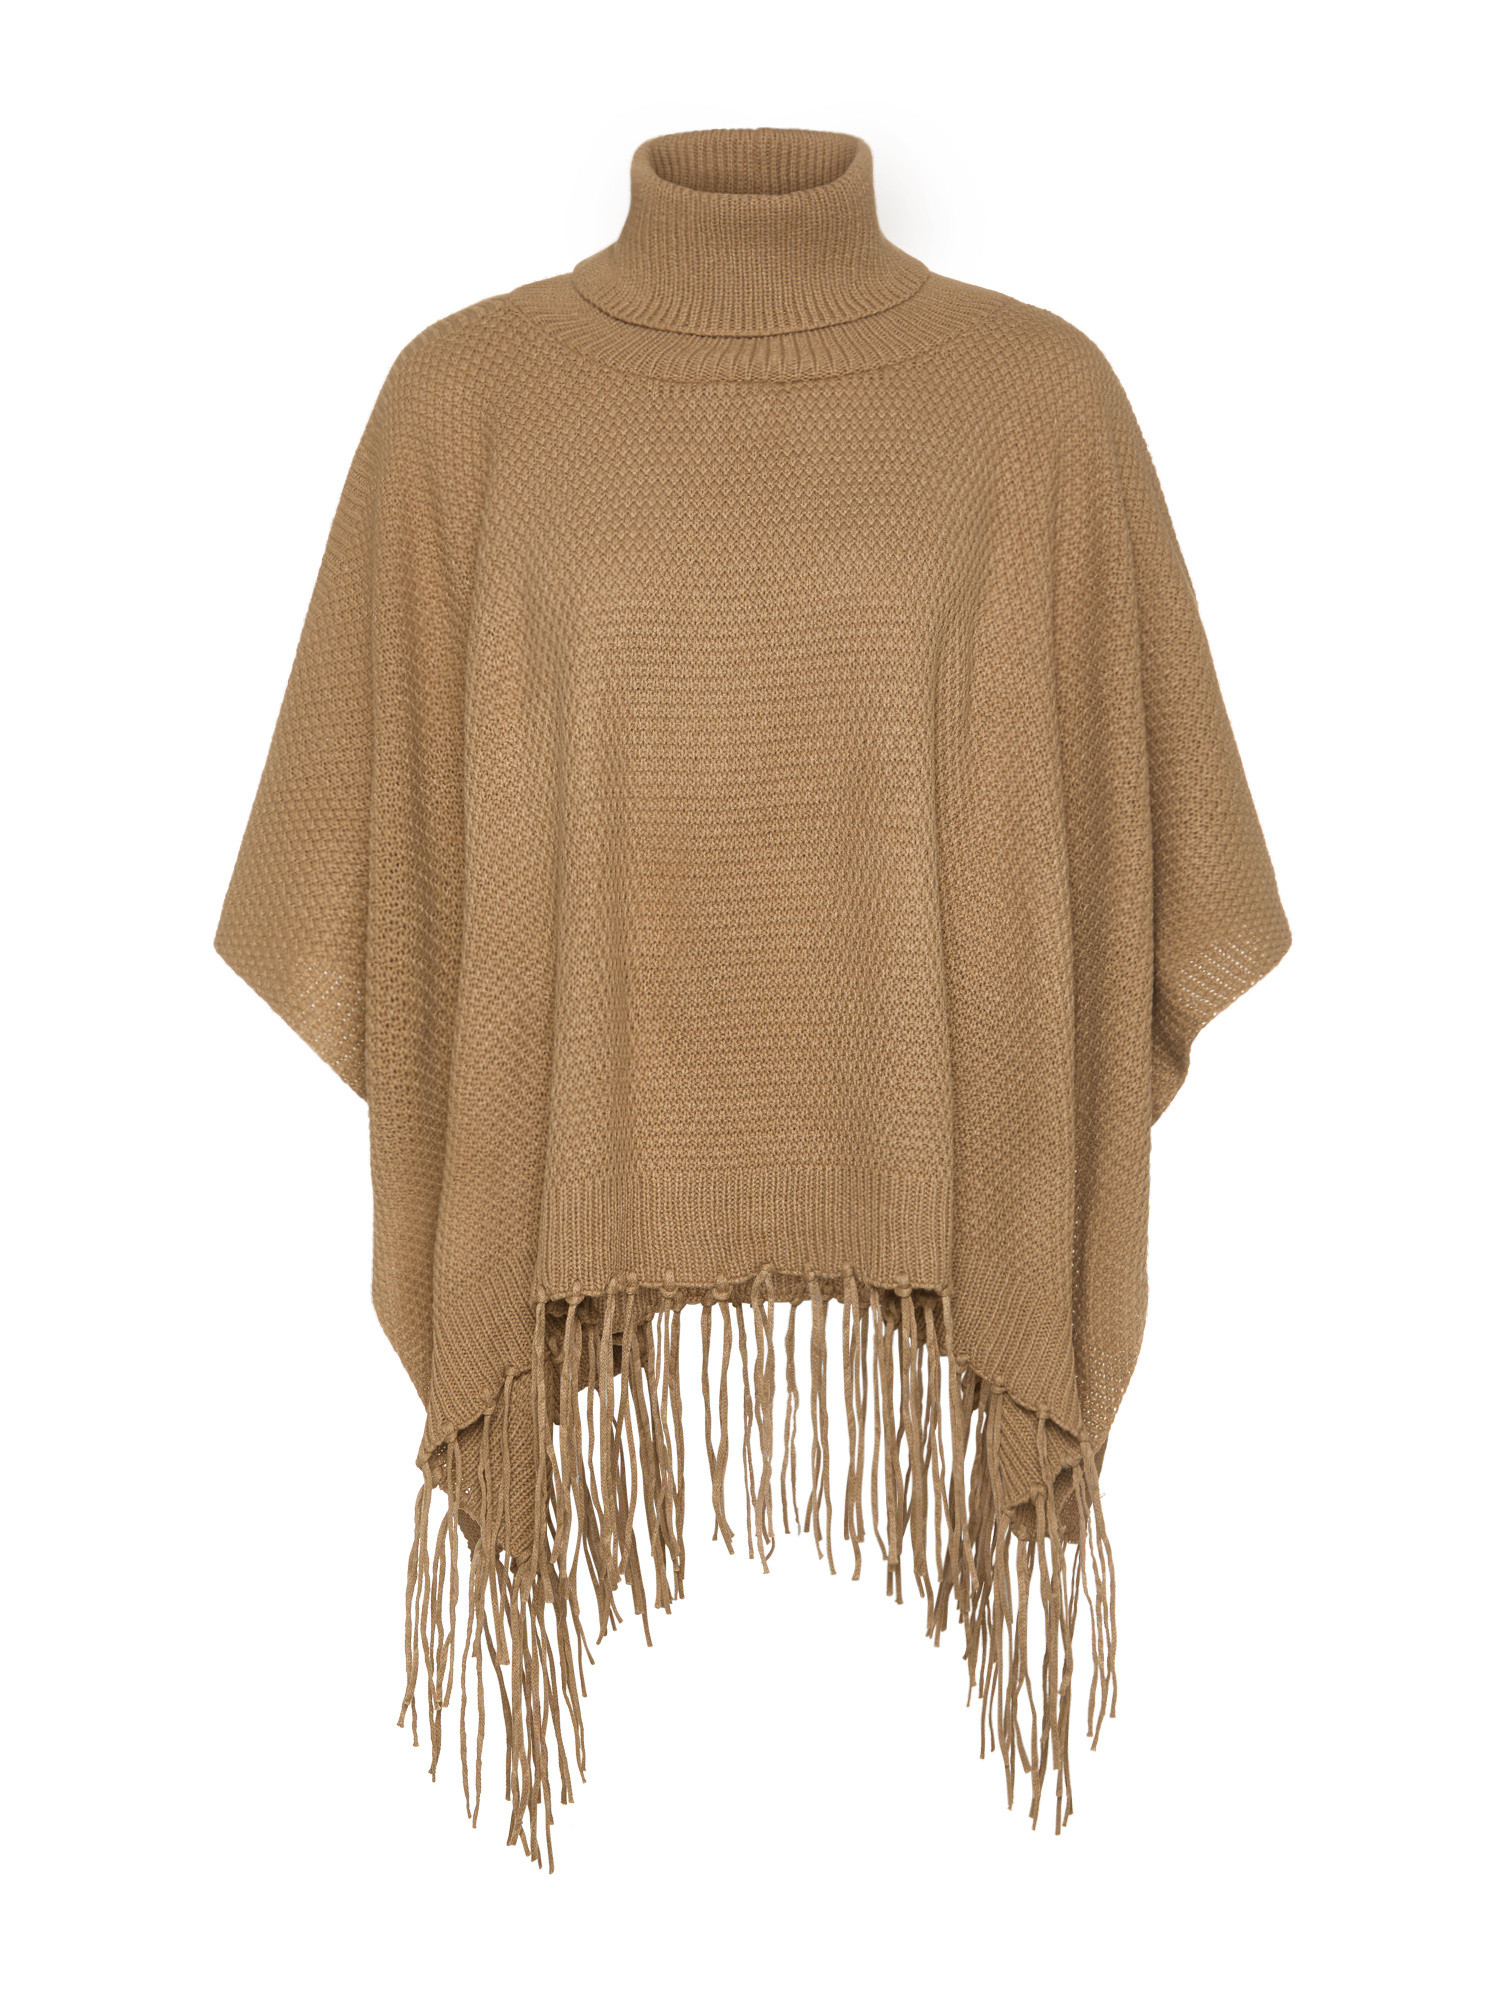 Koan - Poncho in maglia, Cammello, large image number 0